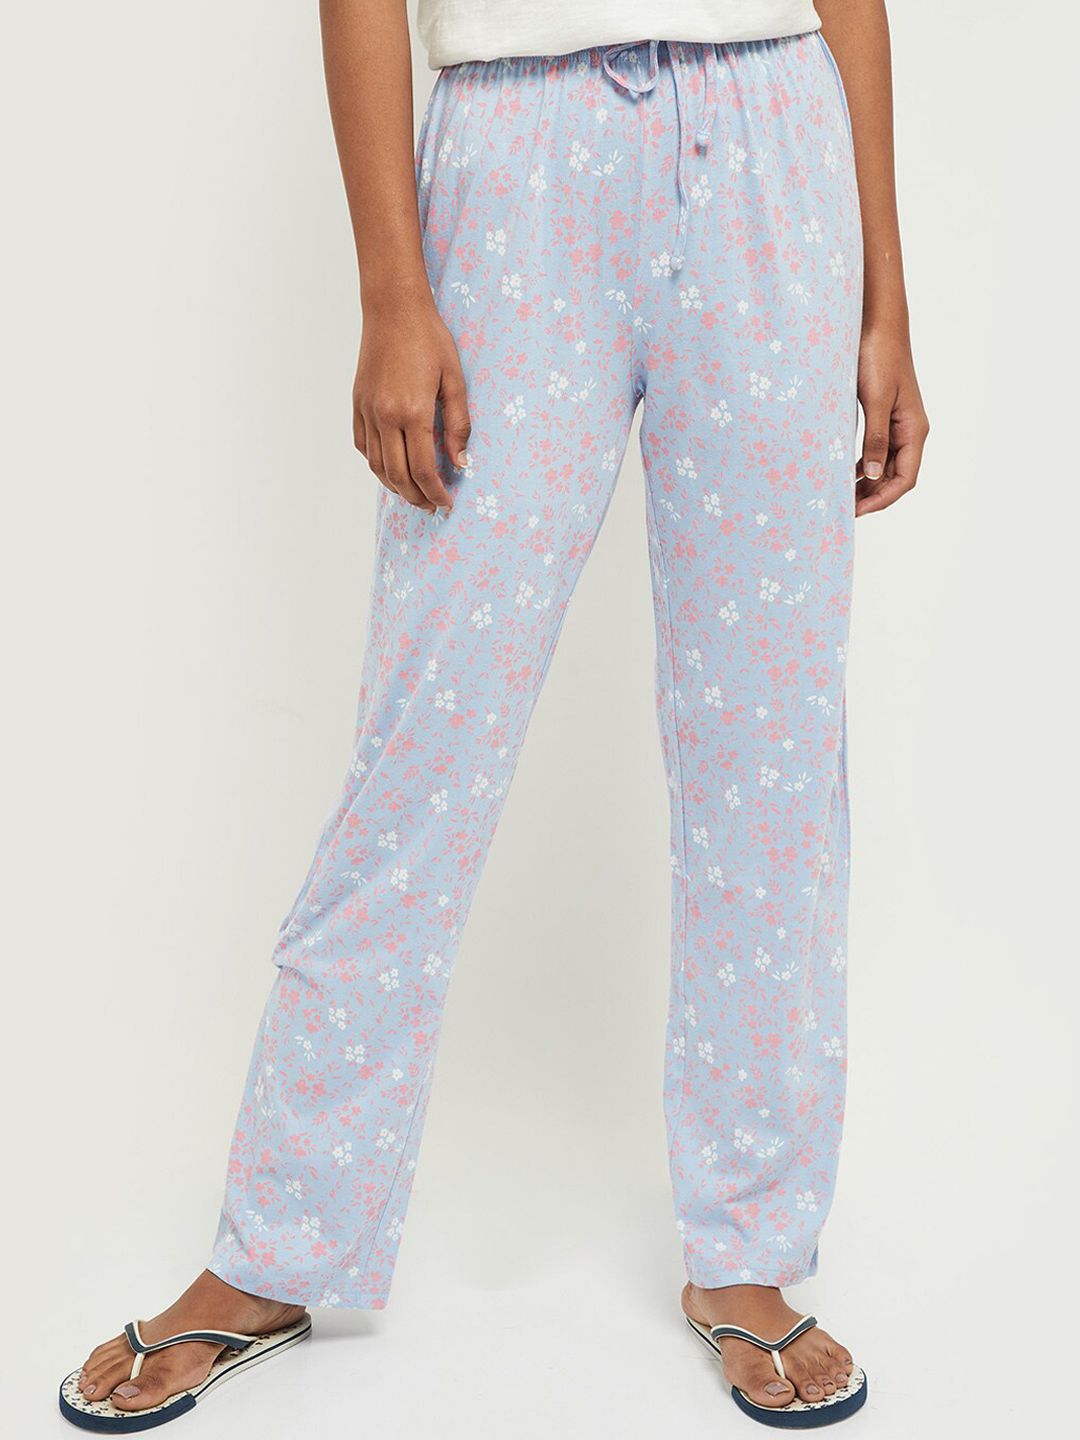 max Women Blue & White Floral Printed Pure Cotton Mid-Rise Lounge Pants Price in India